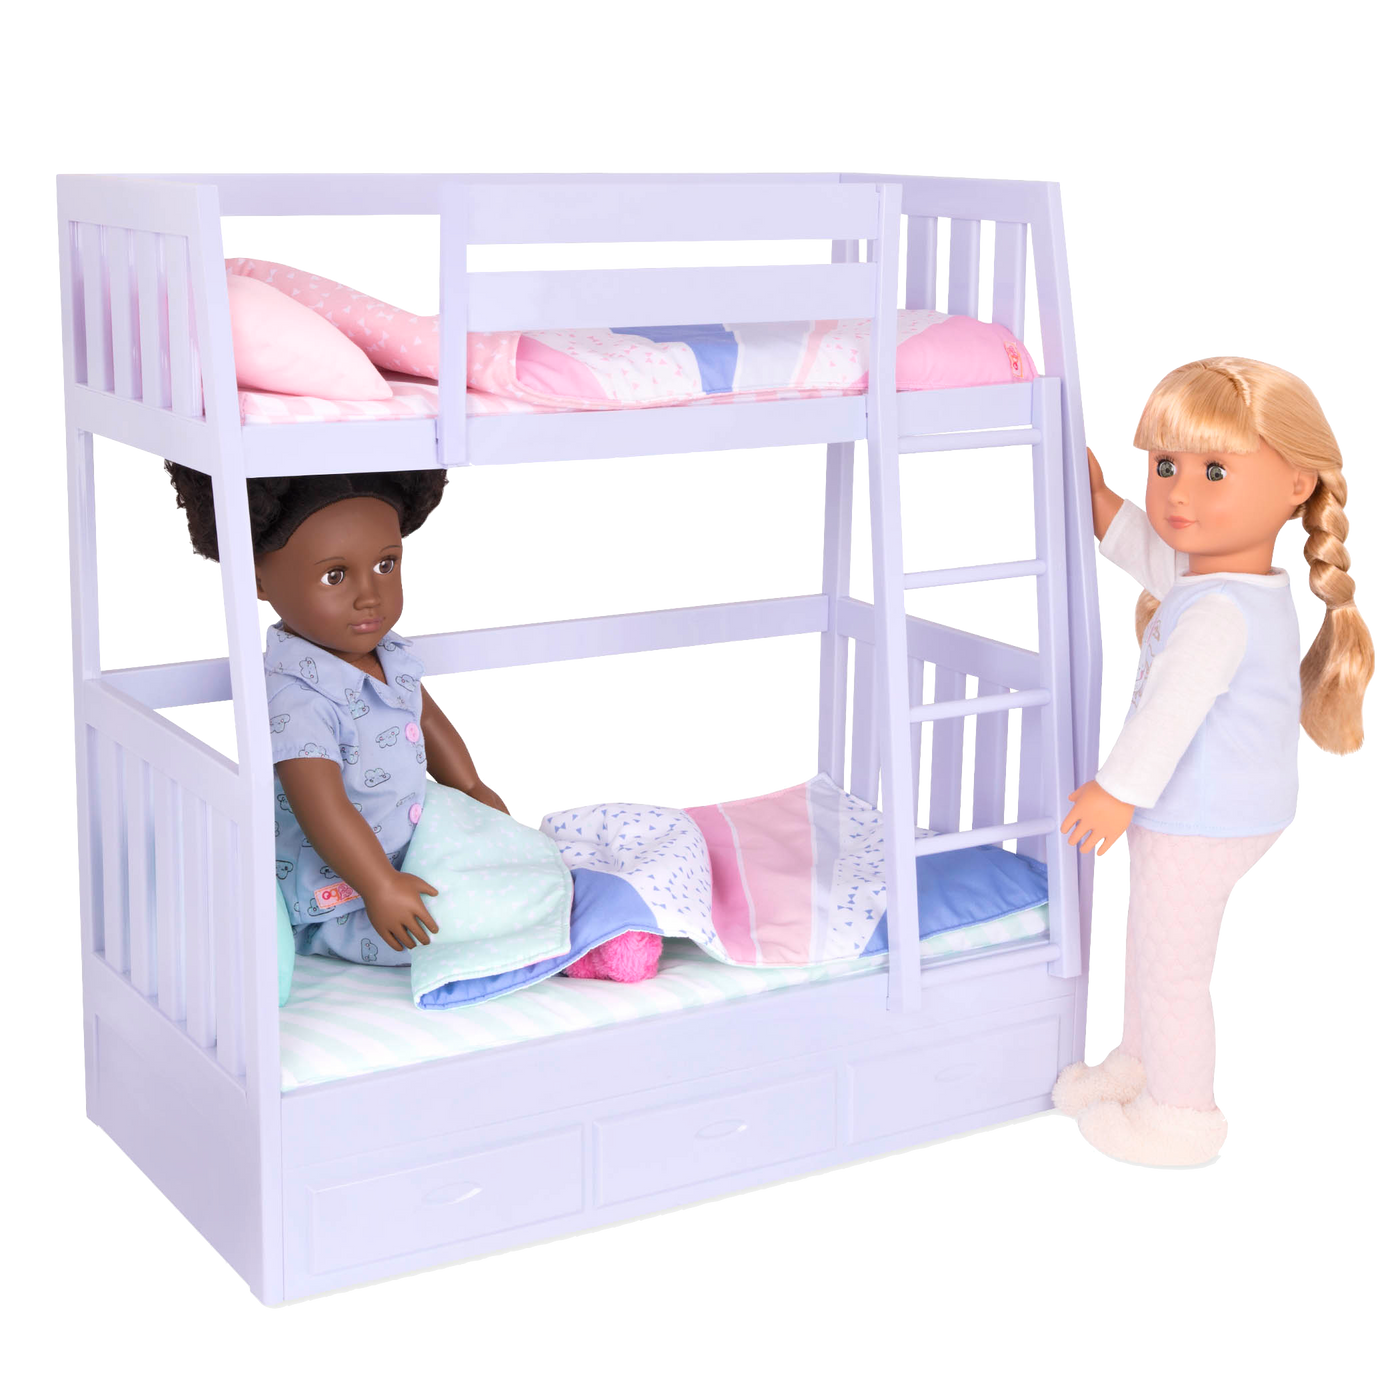 Dream Bunks - Doll Bunk Beds for 18-inch Dolls